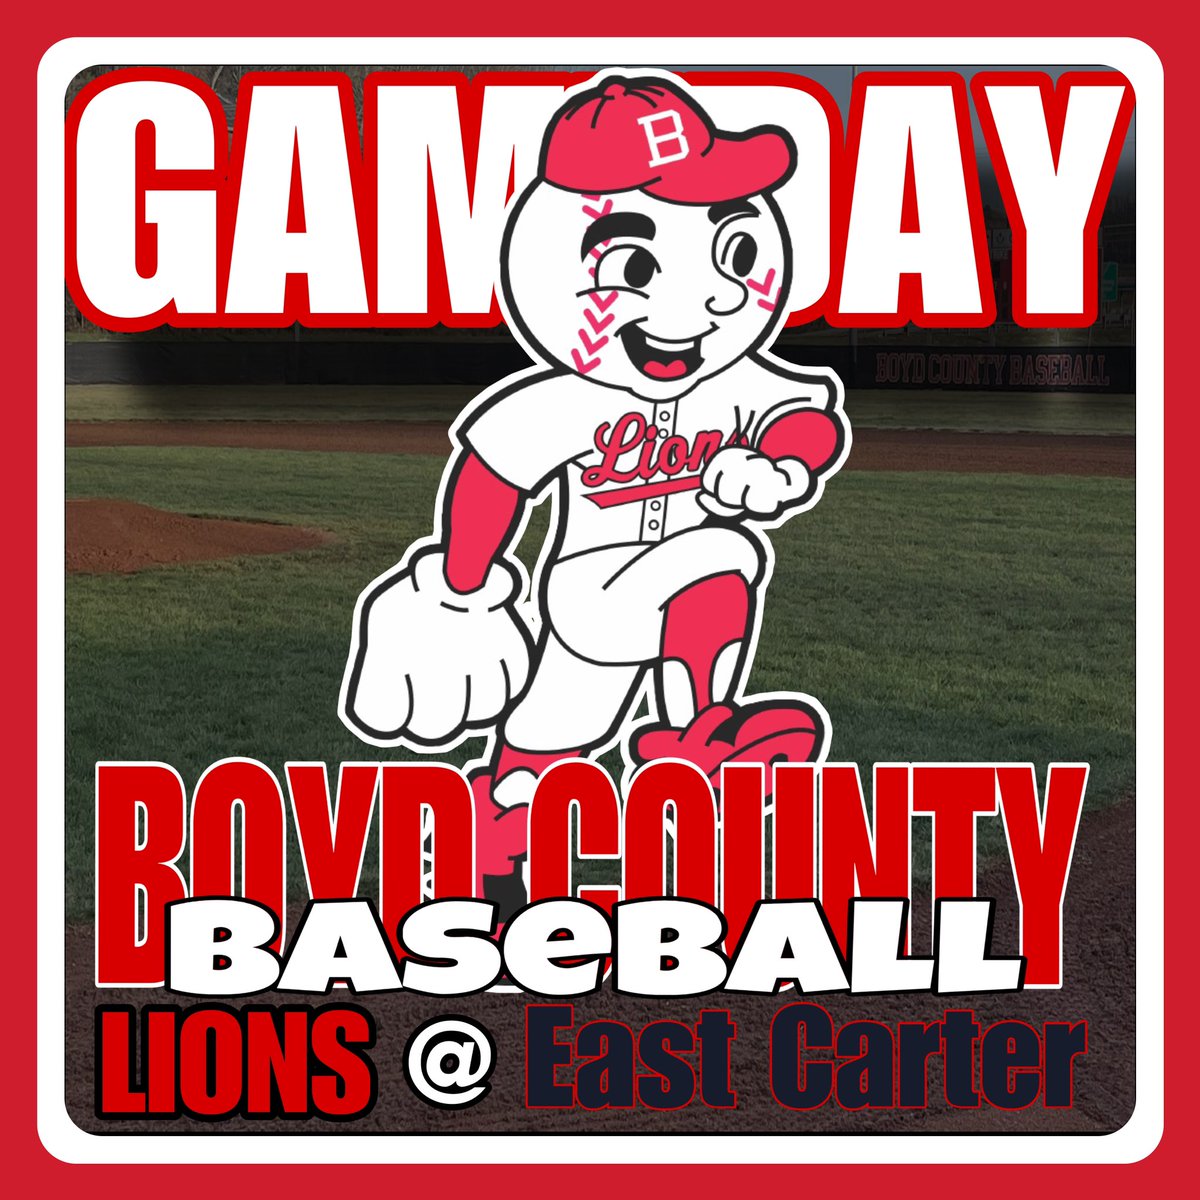 GAMEDAY: #CountyBoys are headed to Grayson this evening with a matchup with a solid East Carter squad. First Pitch scheduled for 6pm